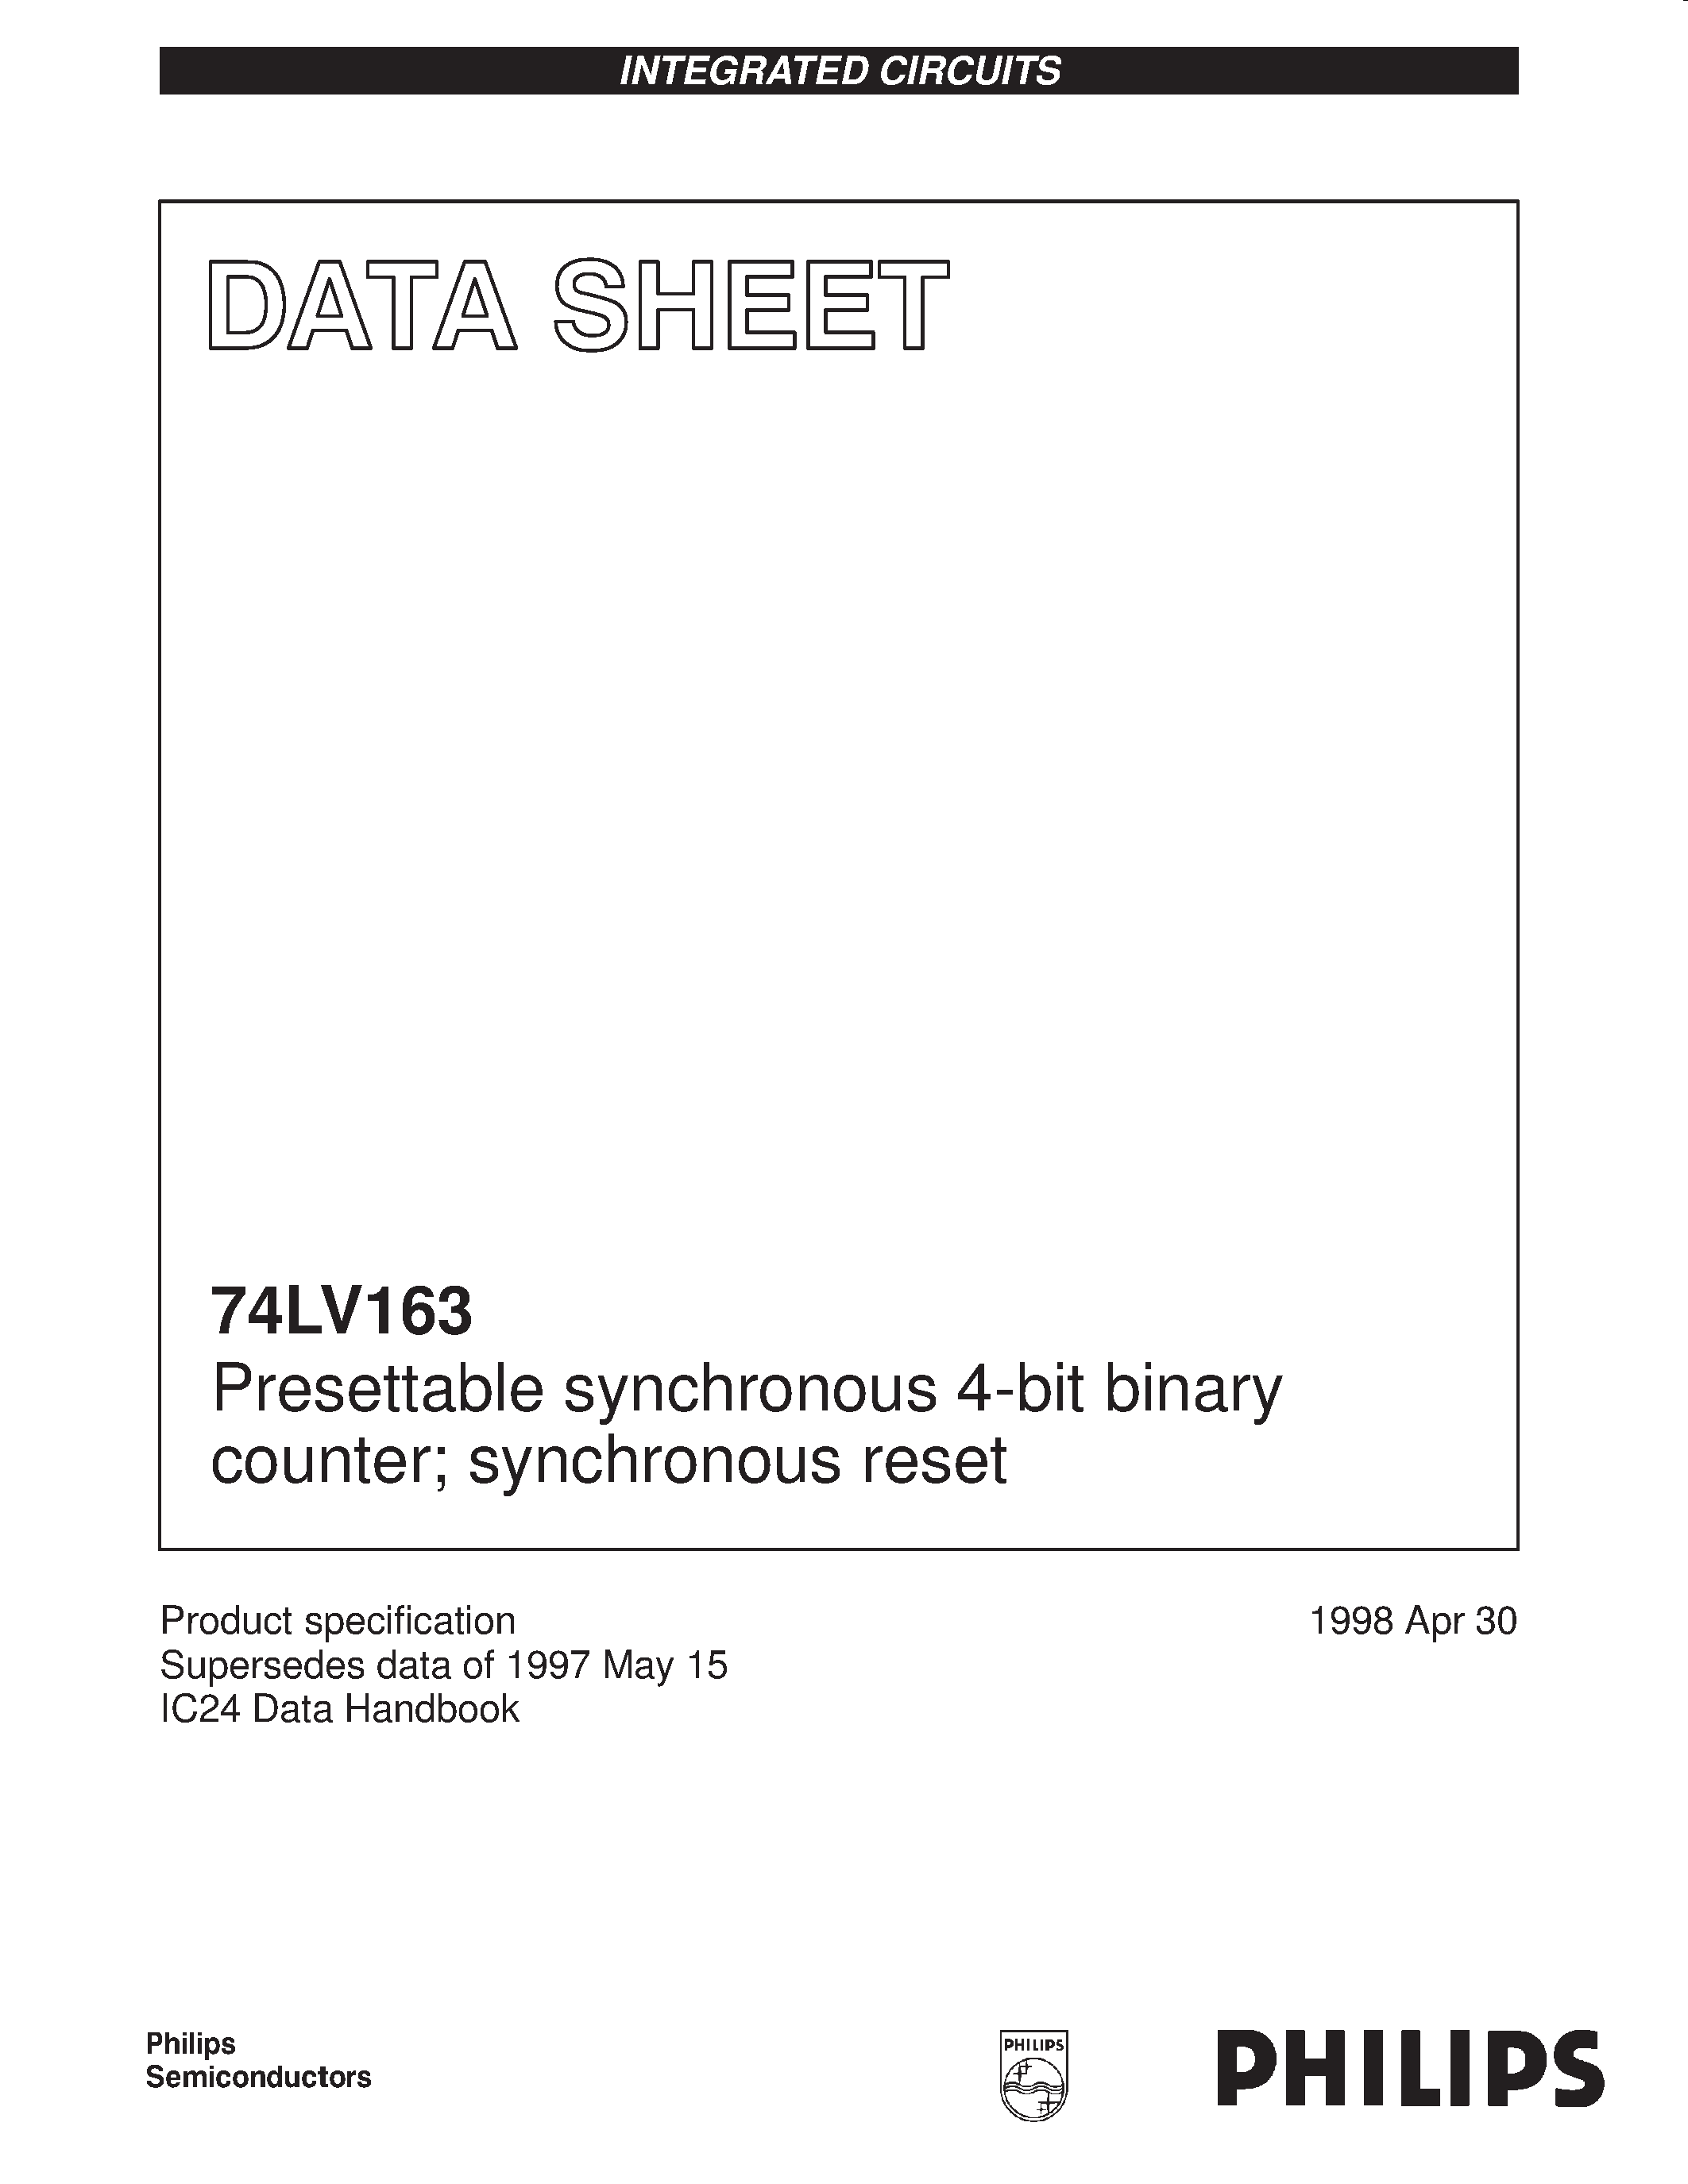 Datasheet 74LV163 - Presettable synchronous 4-bit binary counter; synchronous reset page 1